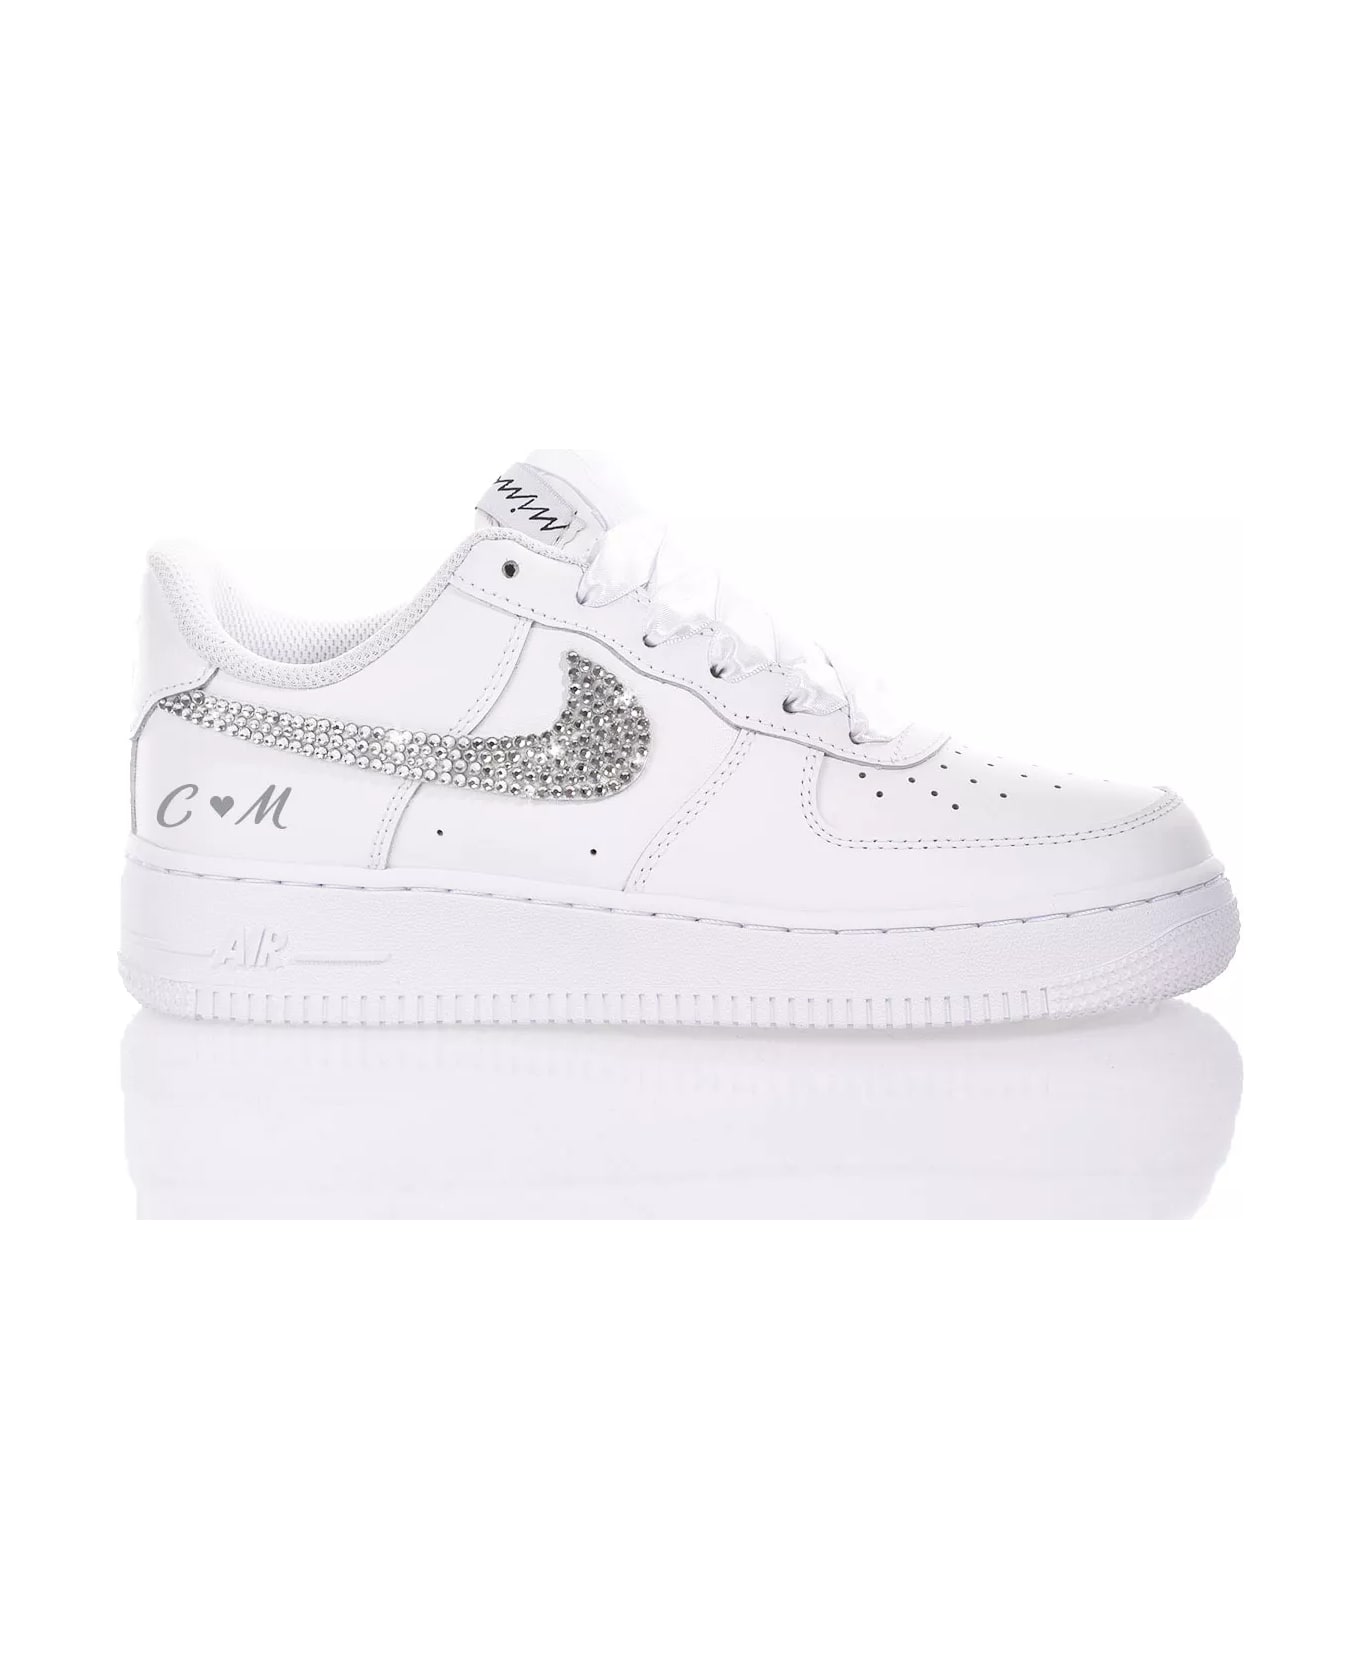 Mimanera Nike Air Force 1 For Wedding